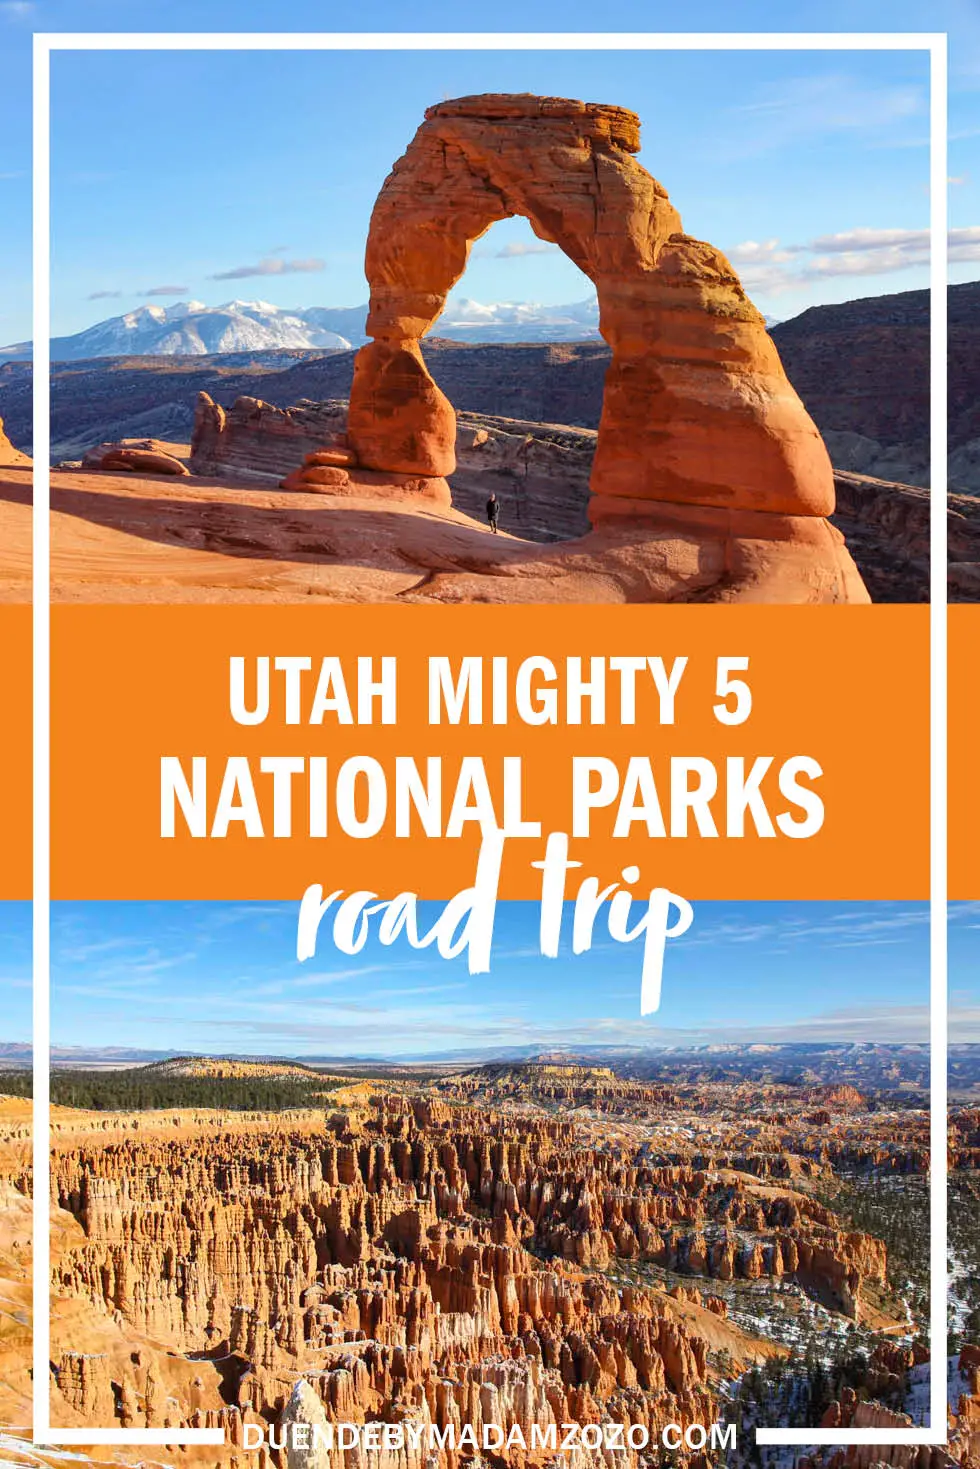 Photos of red rock formations in Arches National Park and Bryce Canyon National Park with text overlay reading"Utah Mighty 5 National Parks road trip"